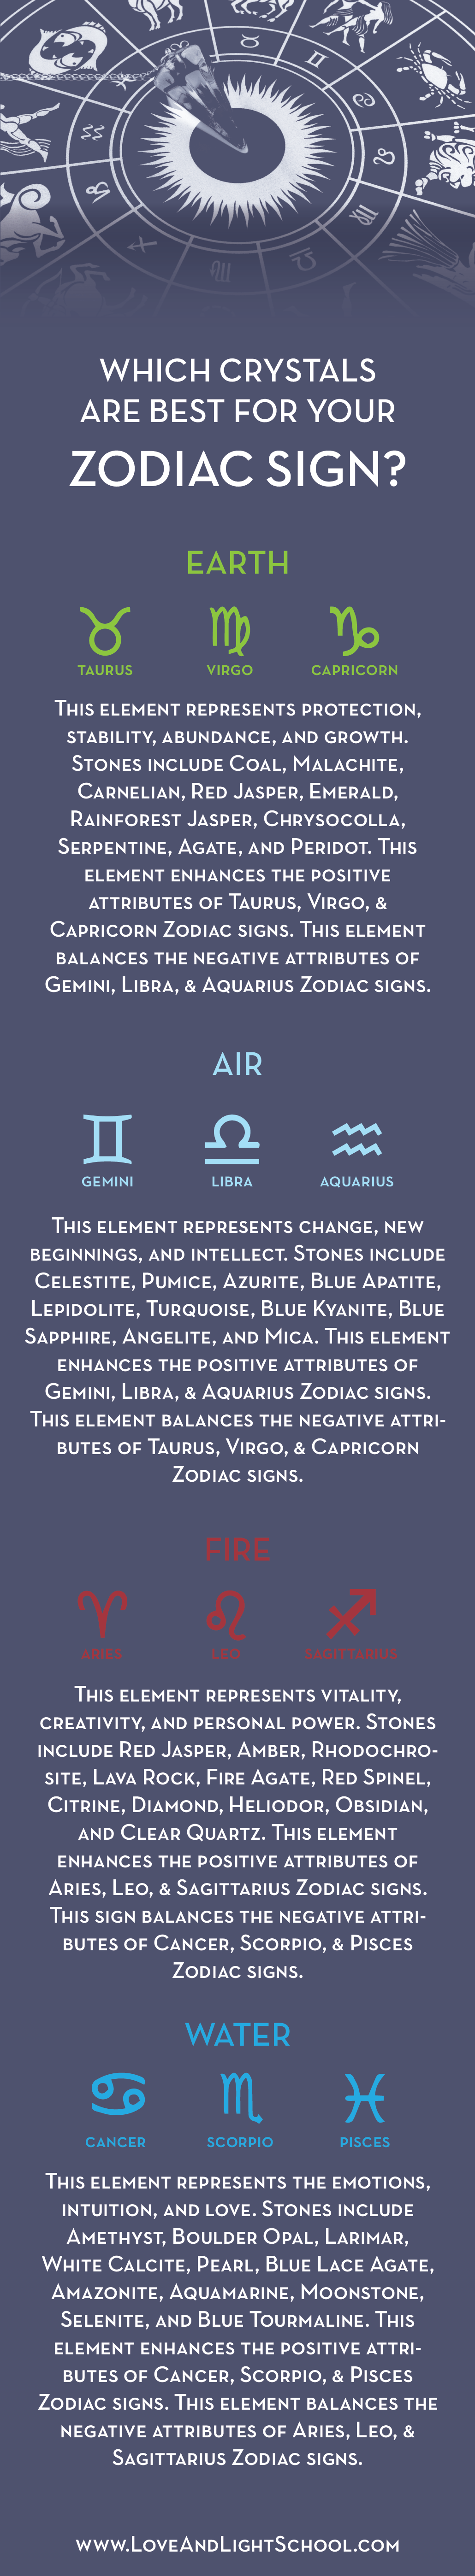 Crystals for zodiac signs